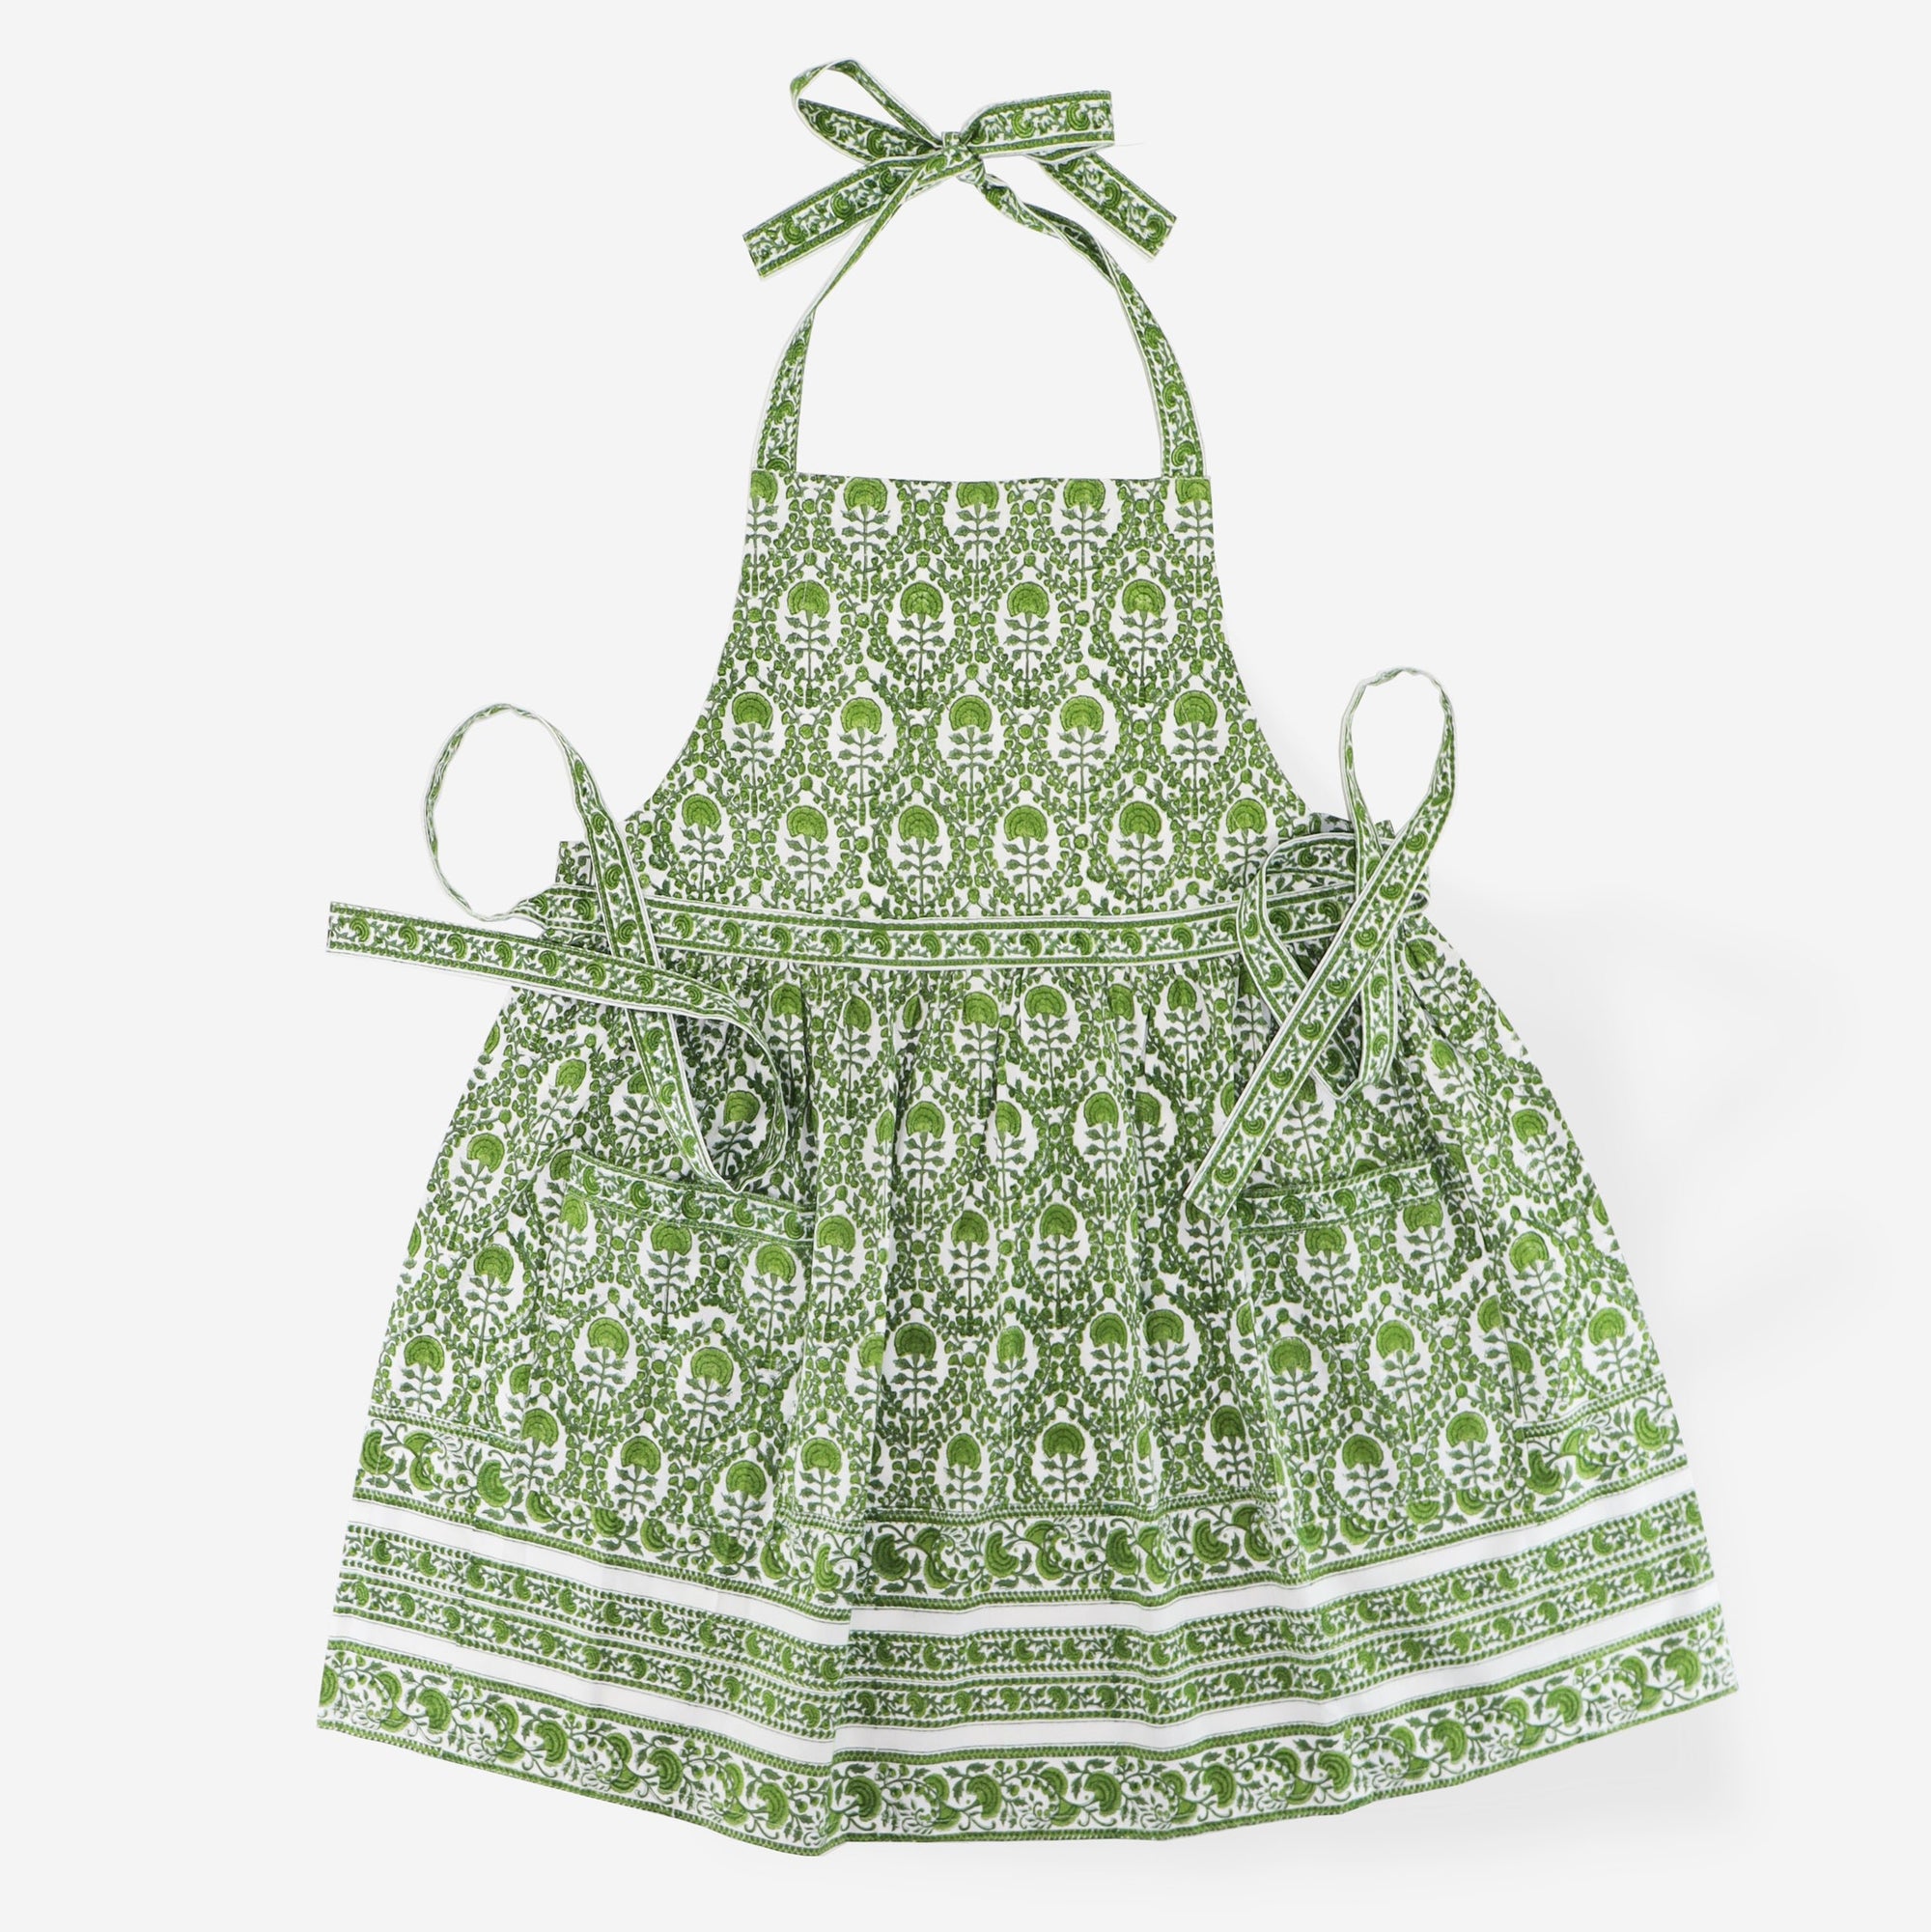 Caroline Green apron consisting of intricate green and white details. 